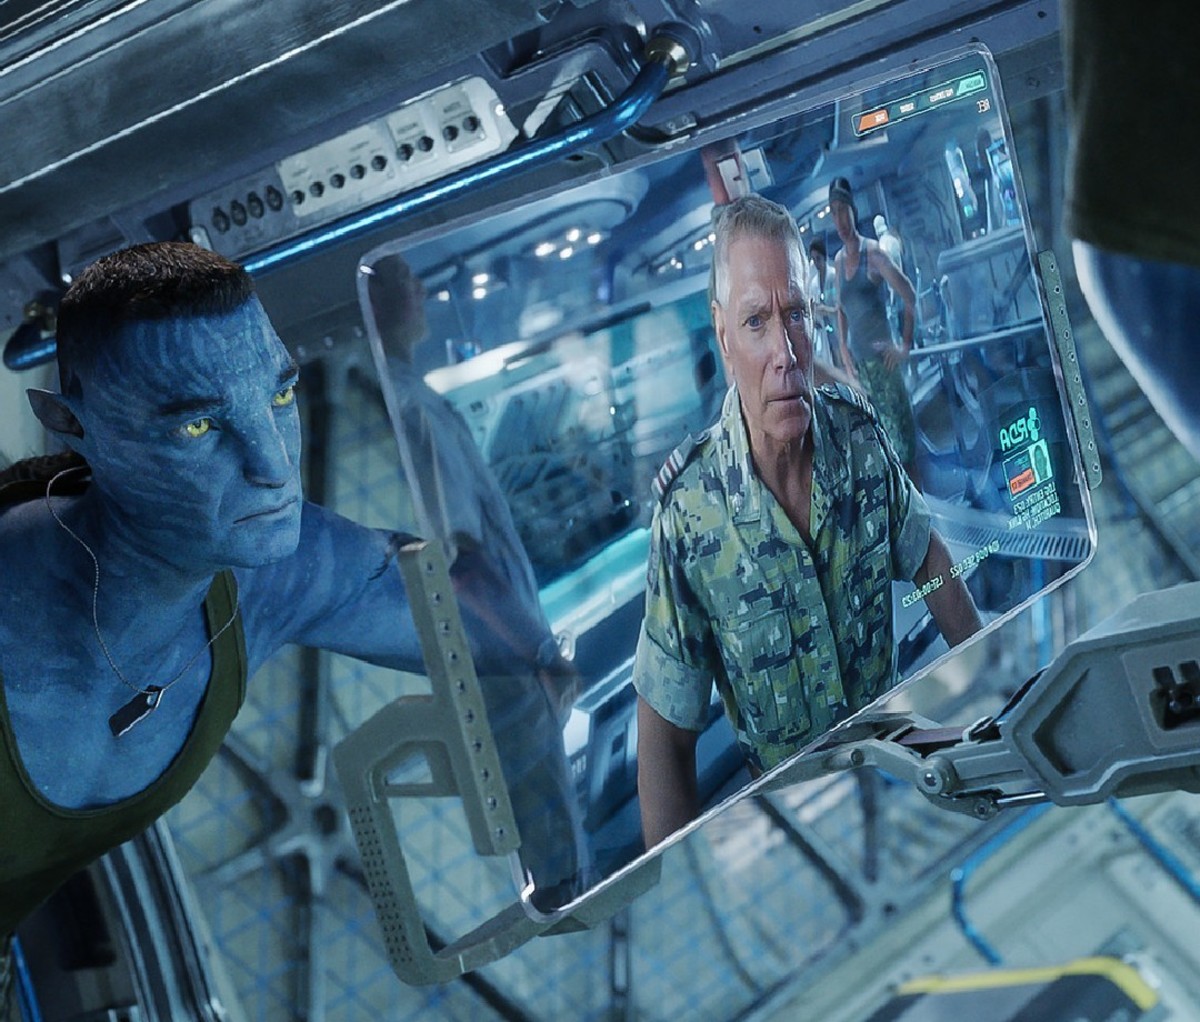 Actor Stephen Lang as Col. Quaritch speaks on a monitor in Avatar: The Way of Water.